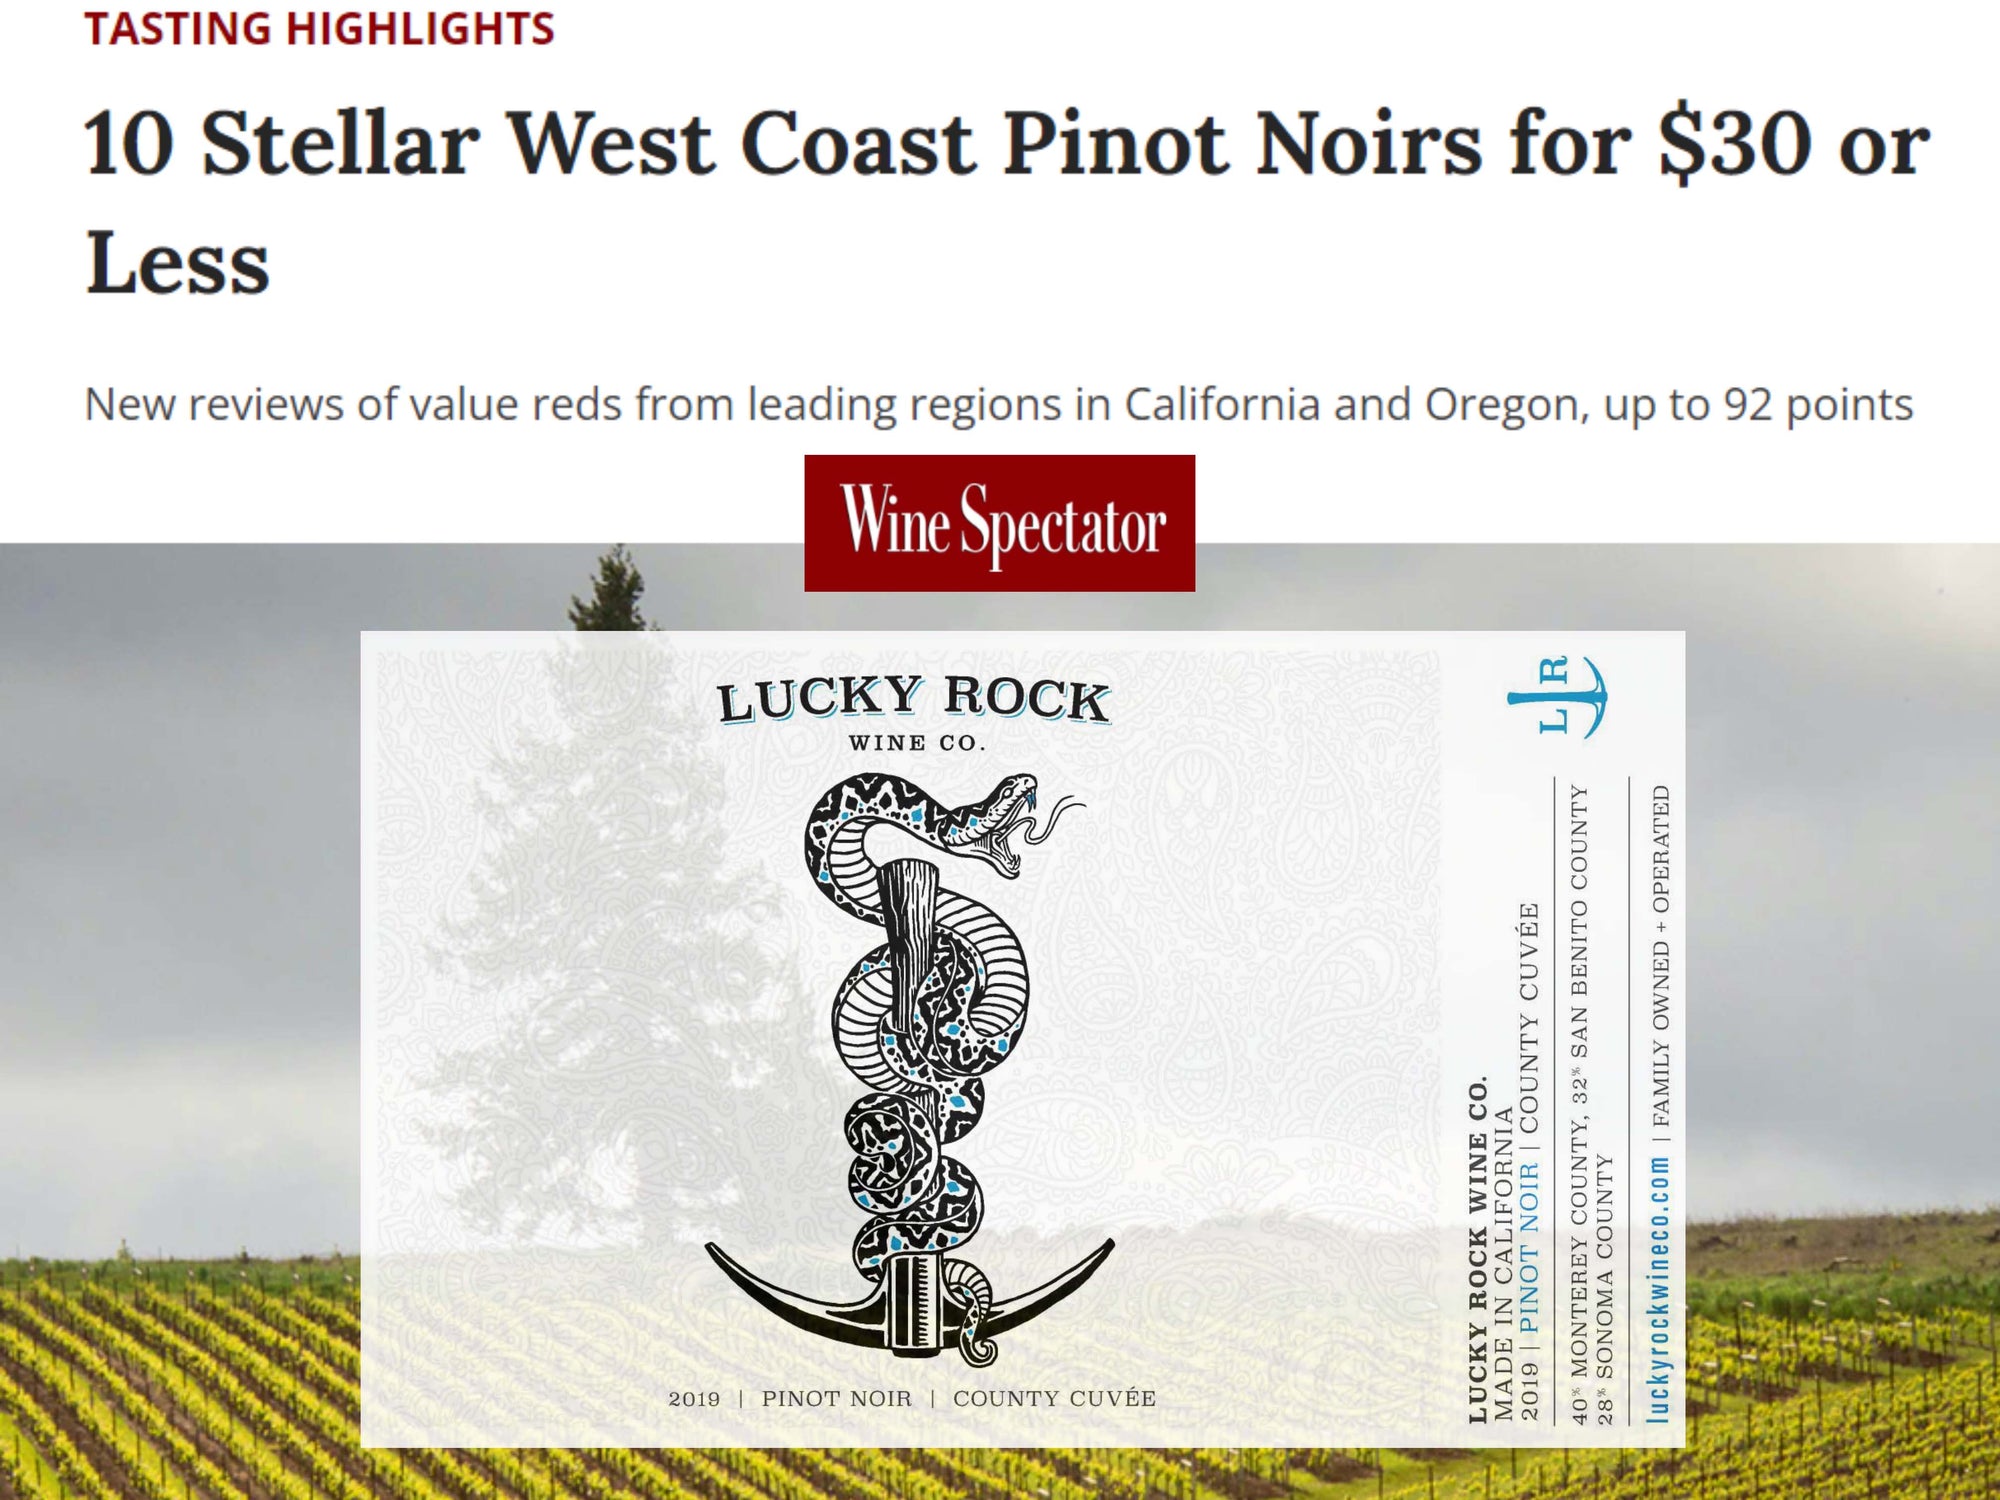 2019 Pinot Noir| Top 10 Stellar West Coast Pinot Noirs for $30 or Less